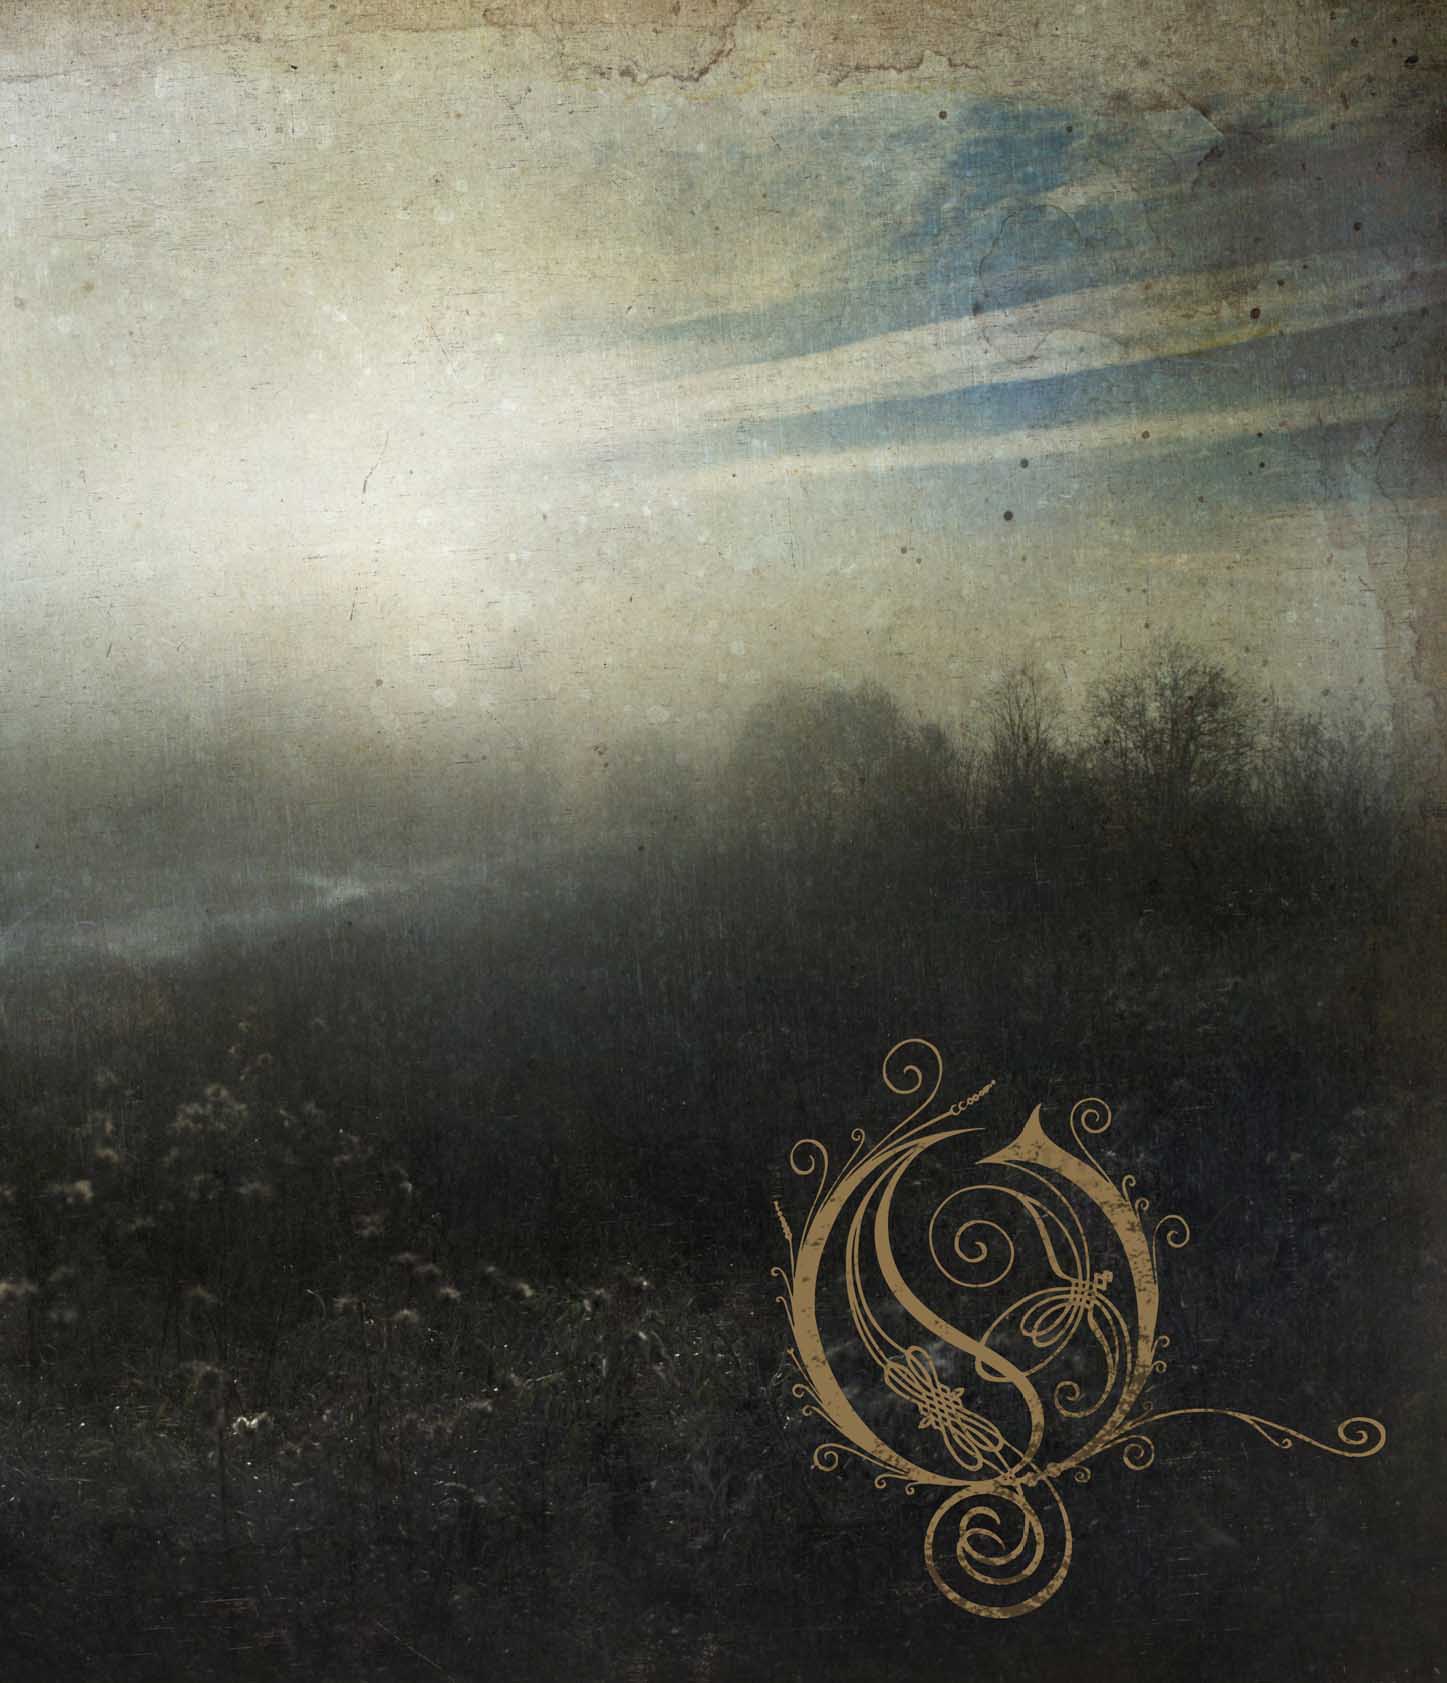 Opeth - Book Of Opeth [Book and Single]